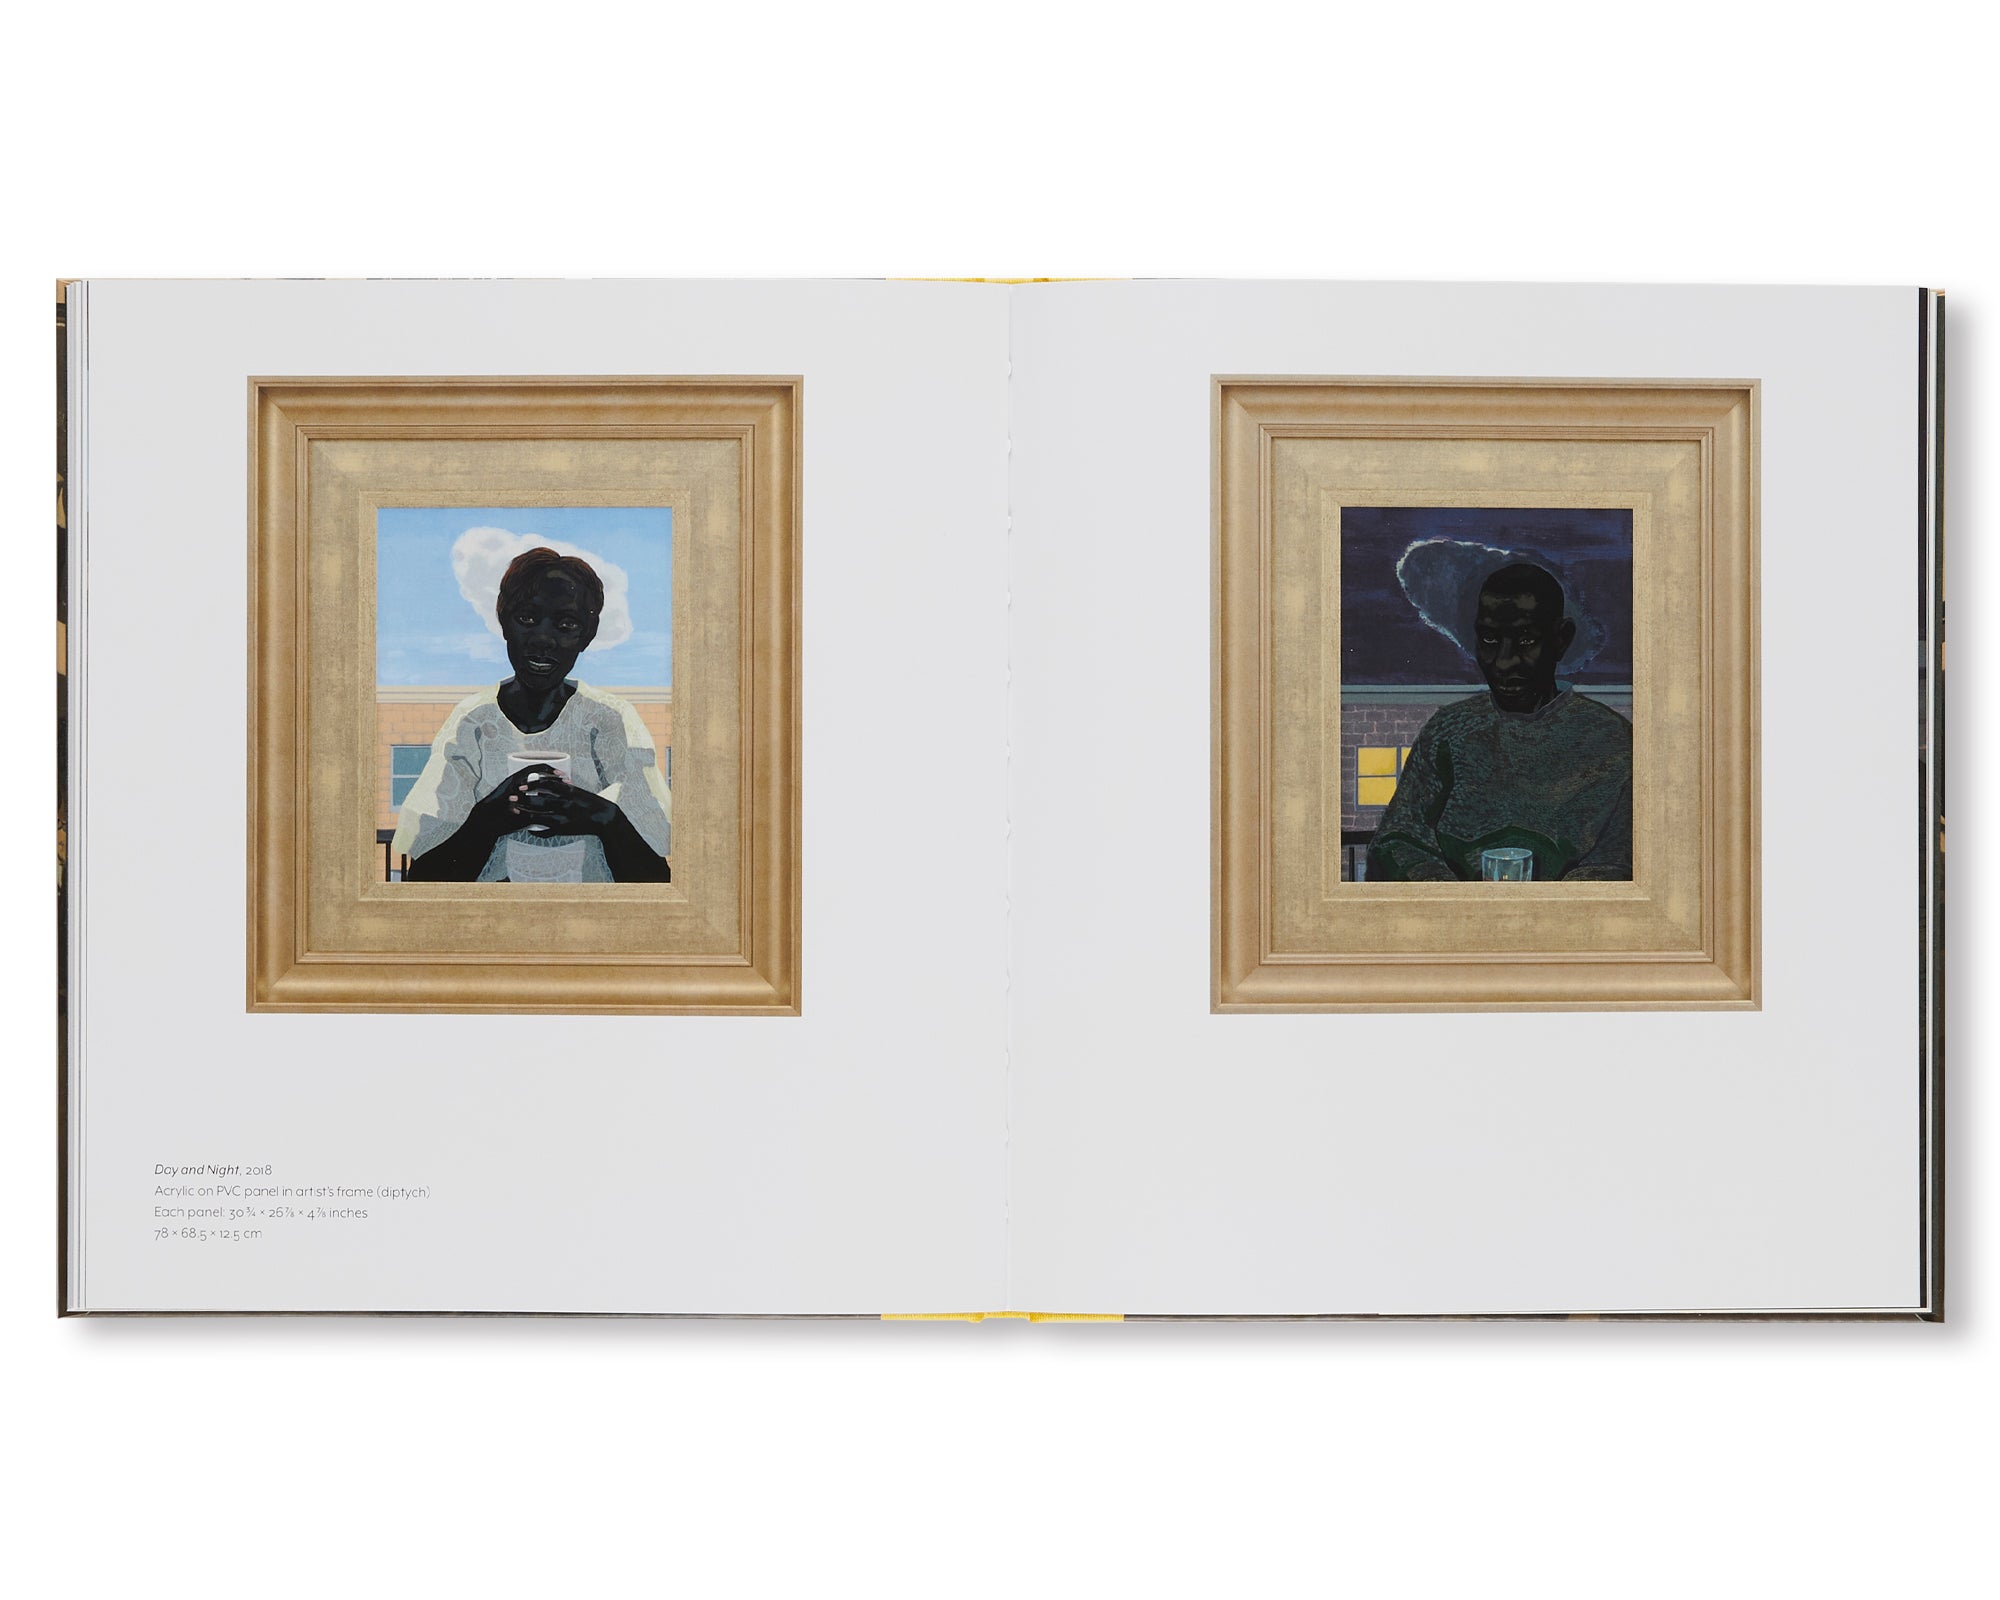 HISTORY OF PAINTING by Kerry James Marshall